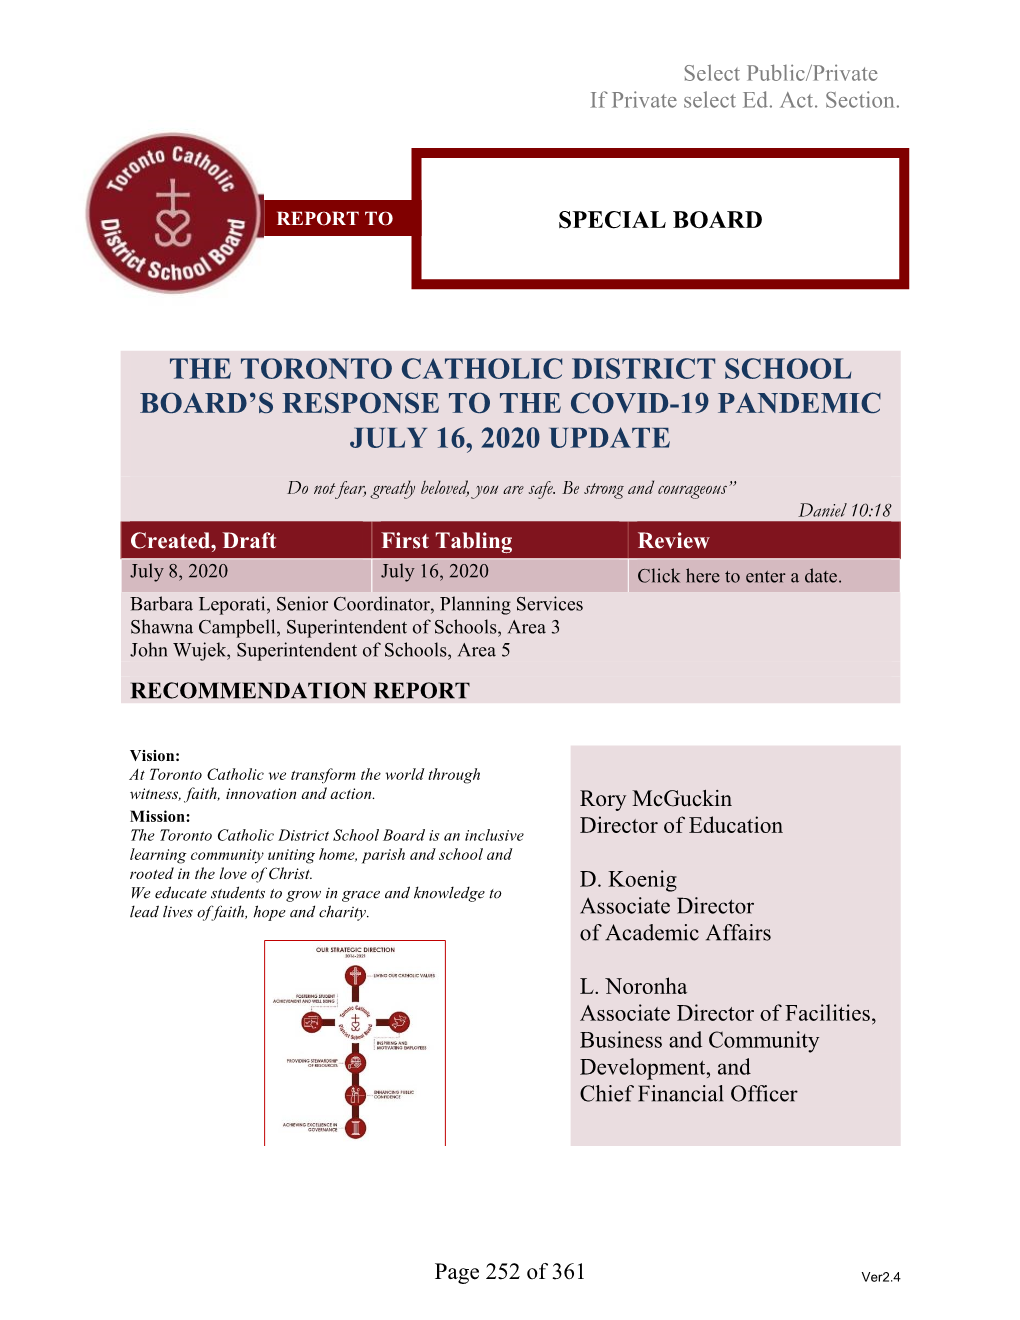 The Toronto Catholic District School Board's Response to the Covid-19 Pandemic July 16, 2020 Update